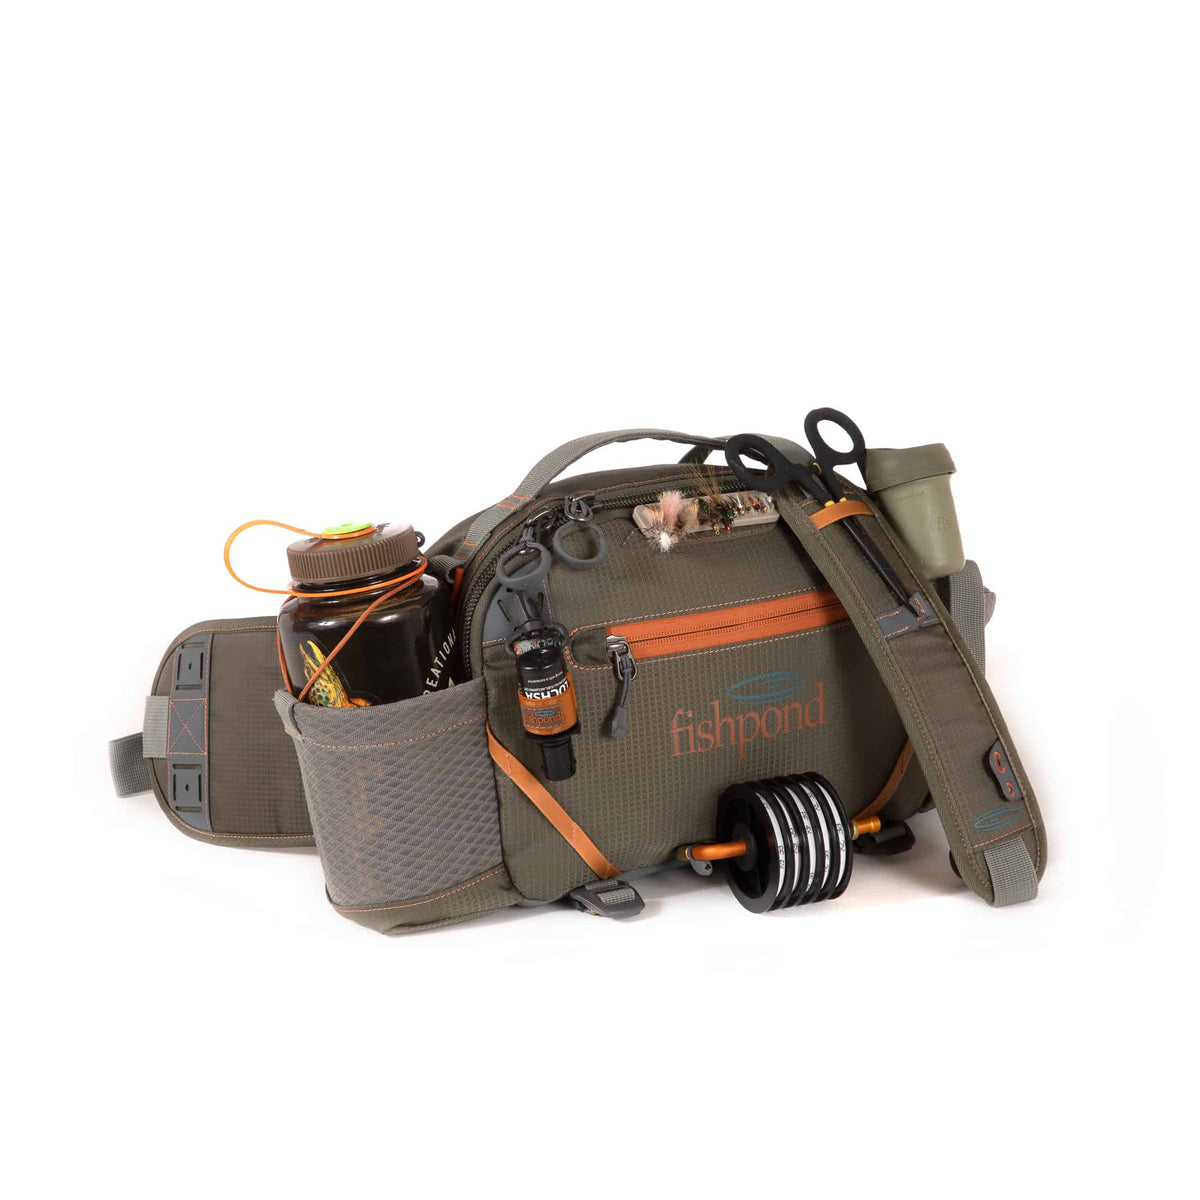 Fishpond Elkhorn Lumbar pack with Headgate Tippet Holder attached as an accessory